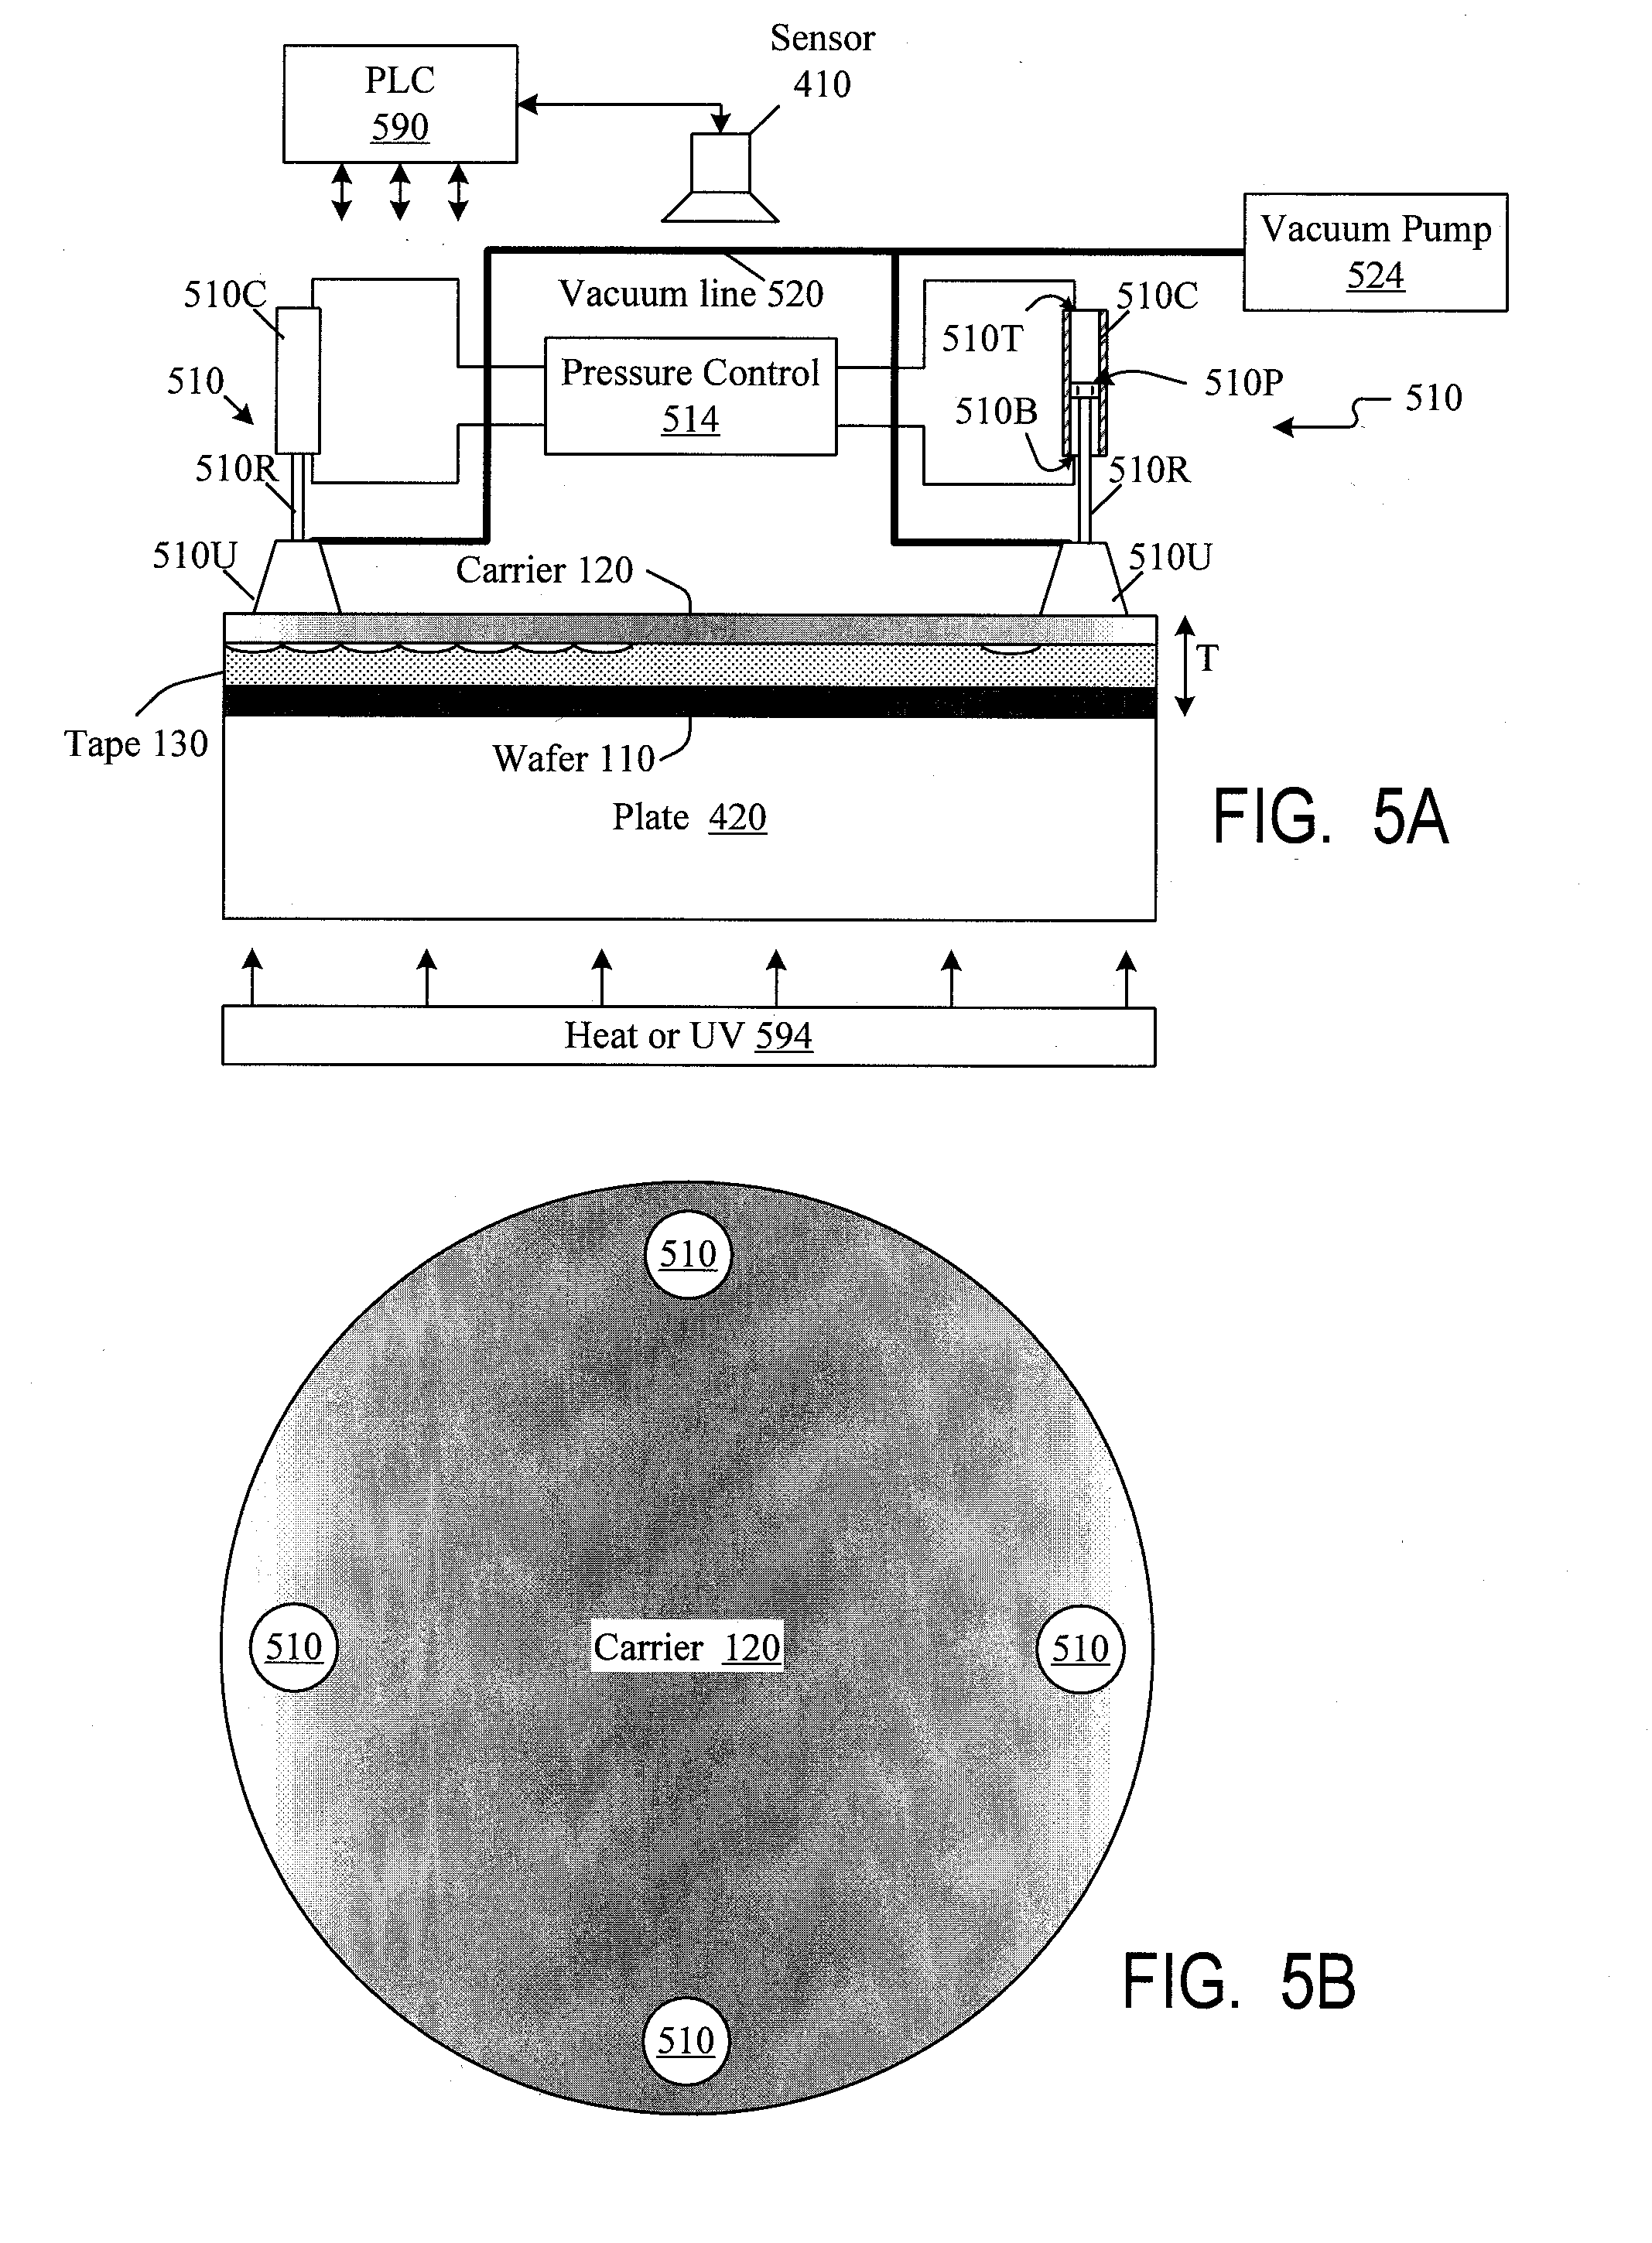 Method and apparatus for debonding of structures which are bonded together, including (but not limited to) debonding of semiconductor wafers from carriers when the bonding is effected by double-sided adhesive tape